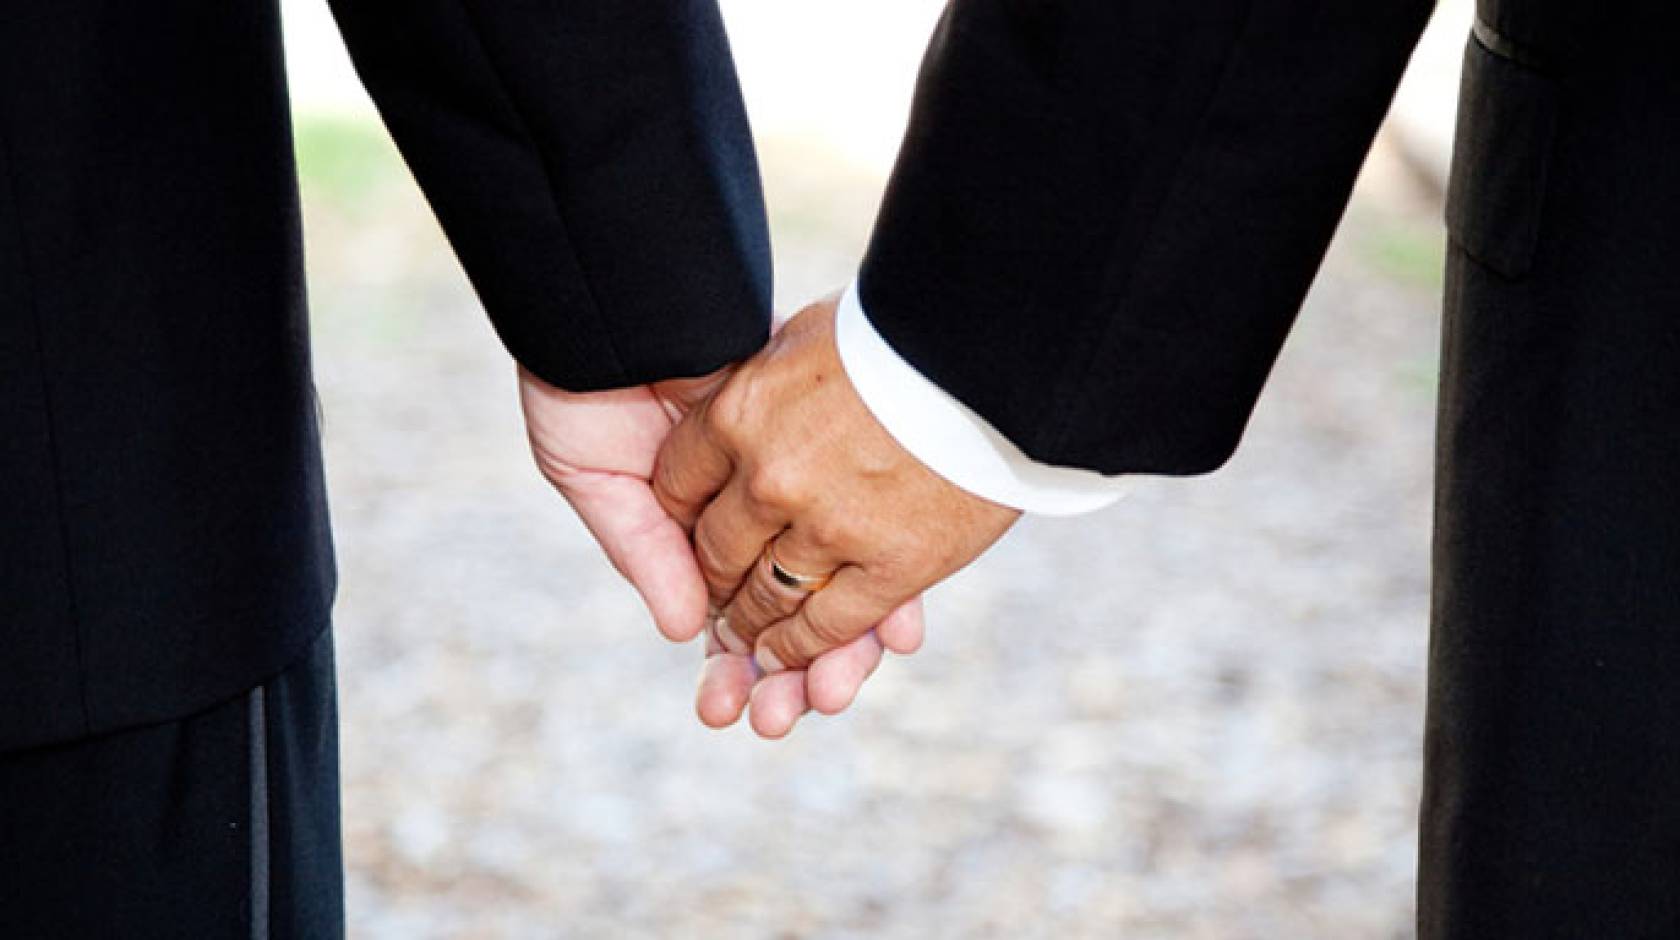 newlywed men hold hands